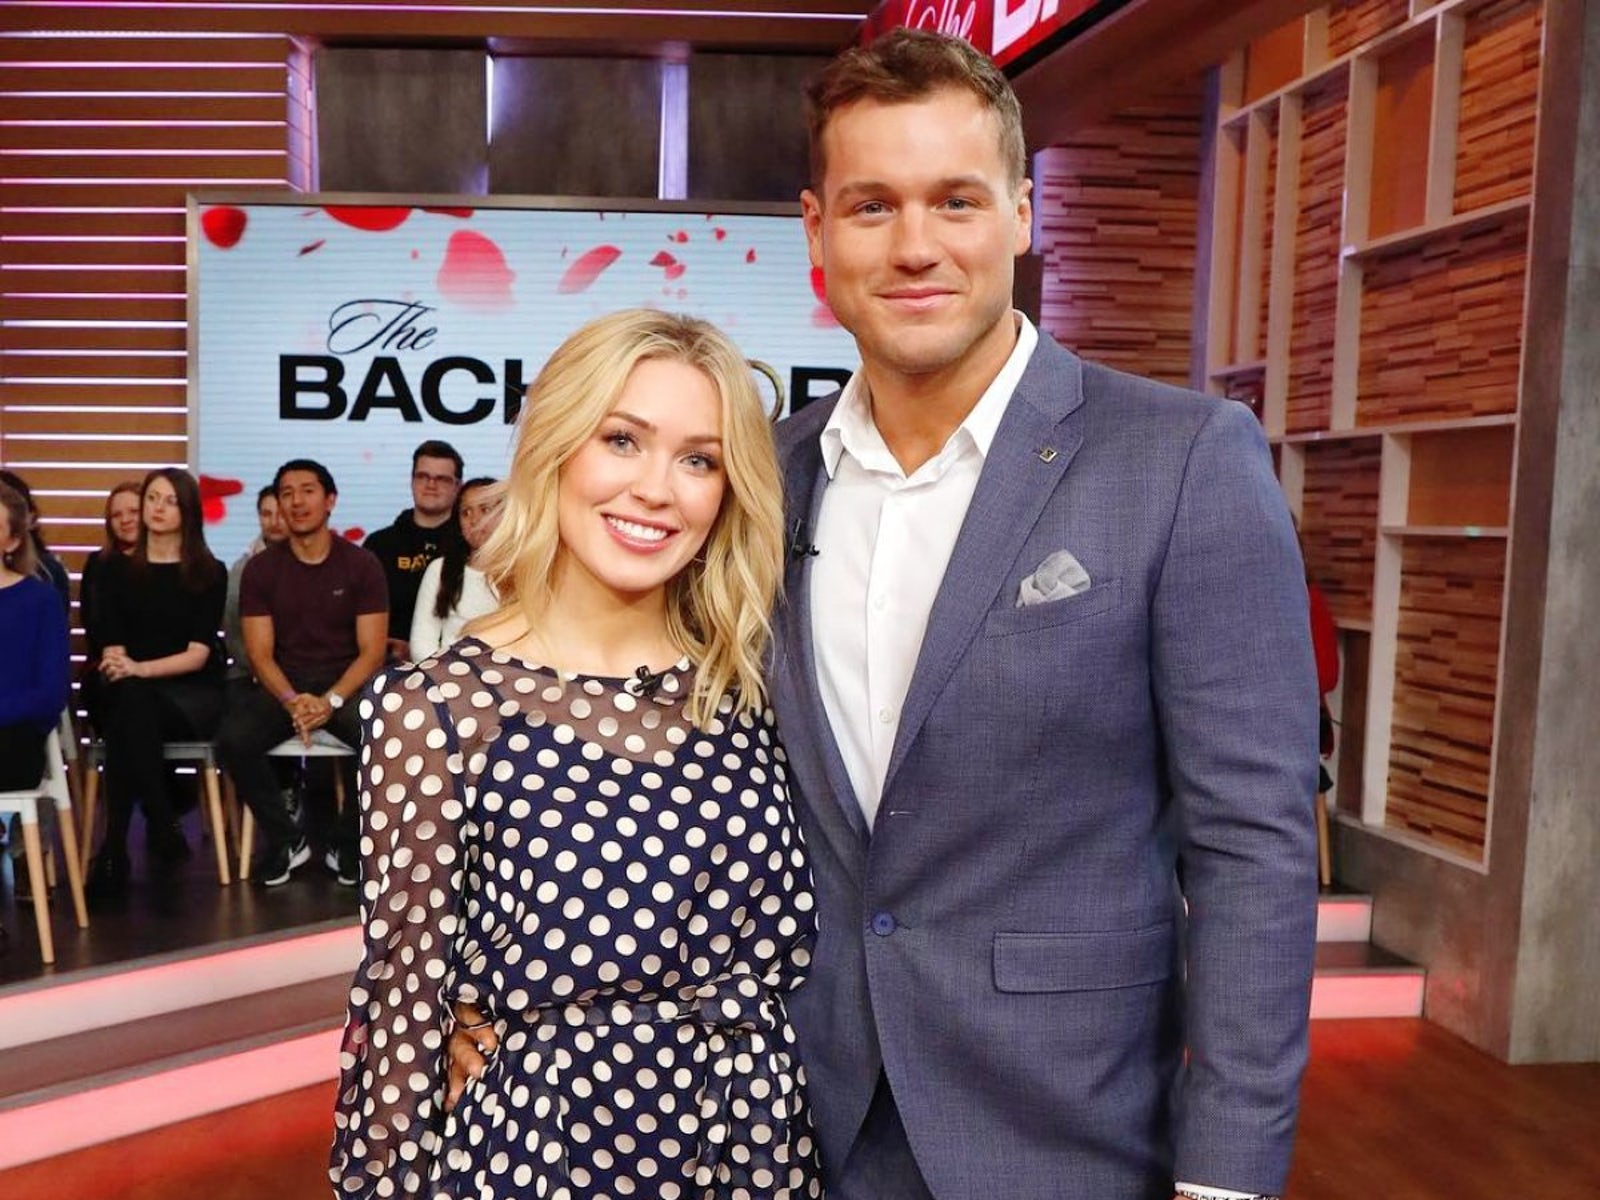 'The Bachelor' couple Colton Underwood and Cassie Randolph dish on